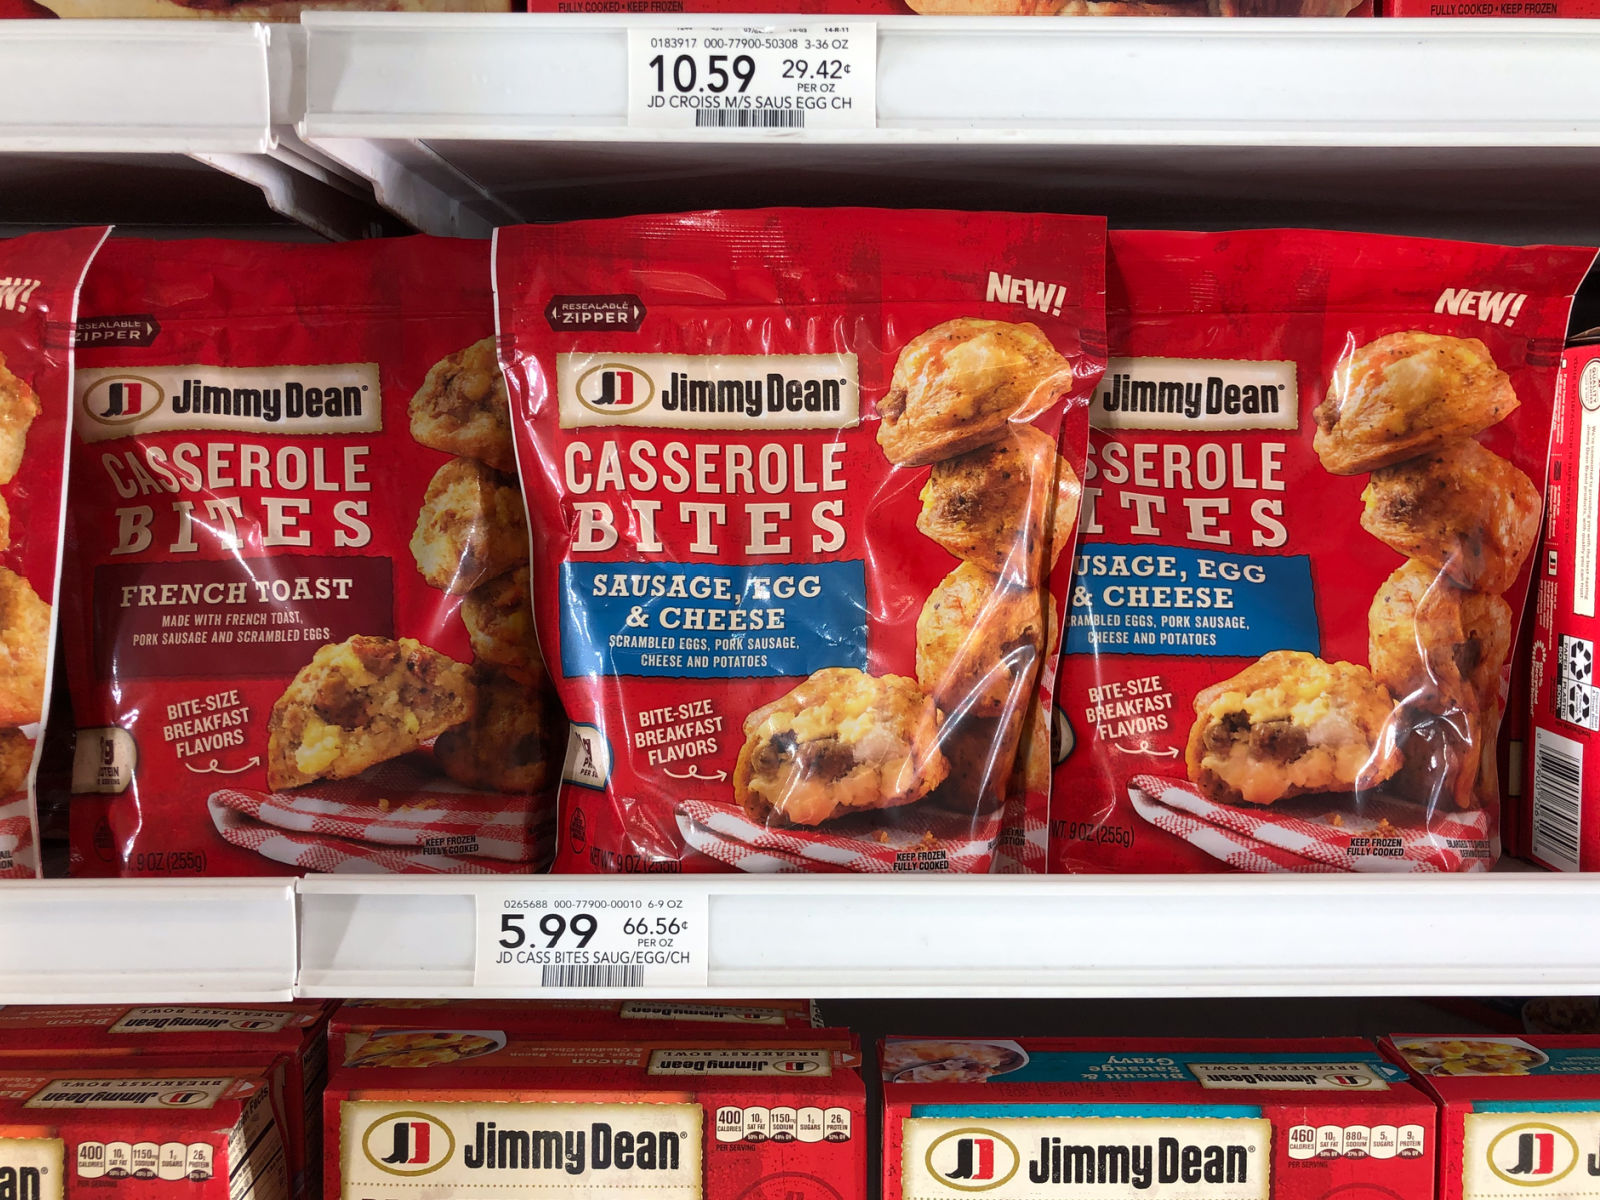 Have You Tried Jimmy Dean Casserole Bites? Enjoy Great Taste & Convenience That’s Perfect For Your Busy Morning